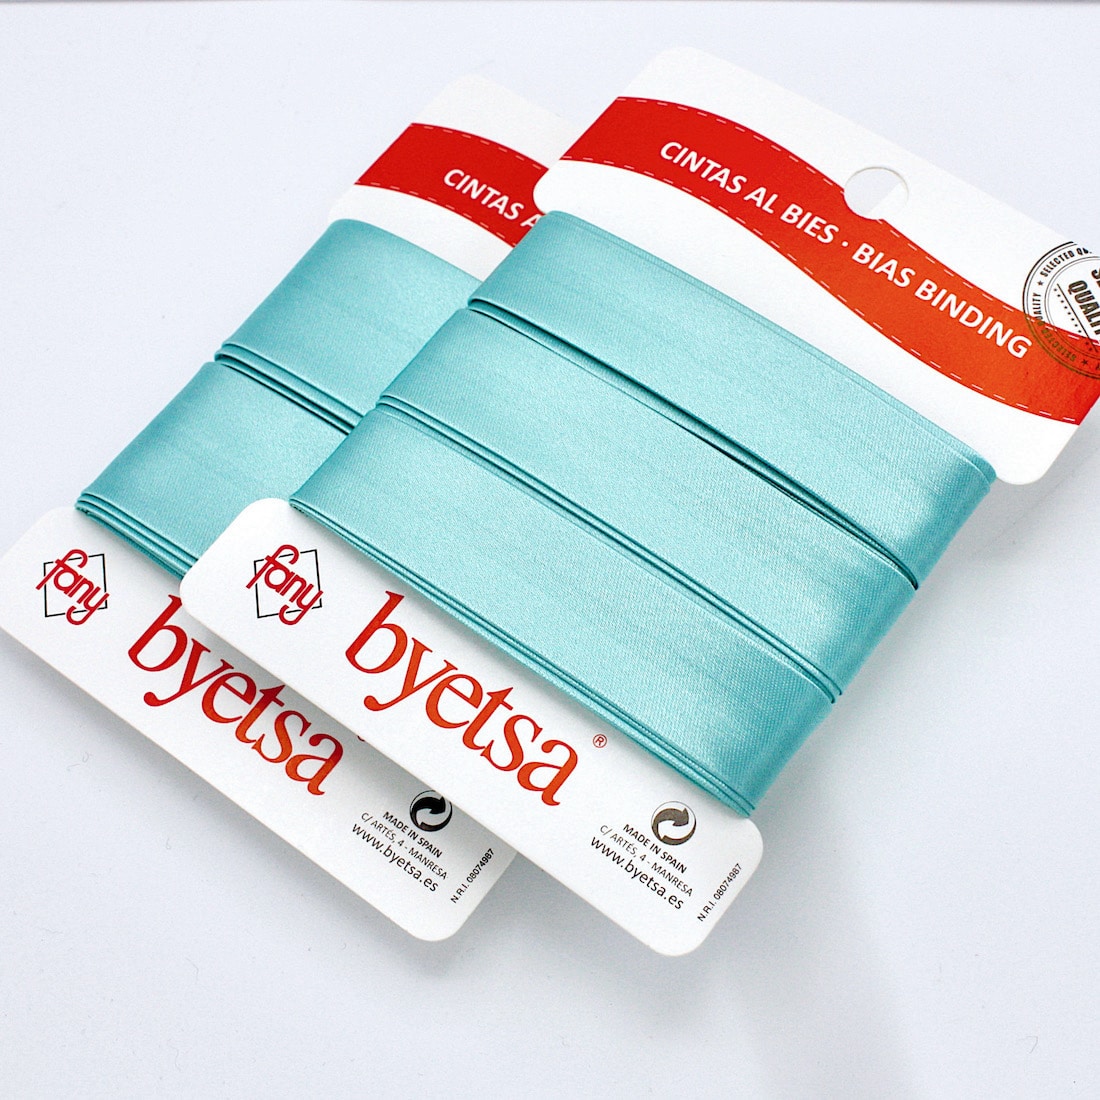 5 metres of Pre-packed Satin Bias Binding Tape in 18mm and 30mm width in Pale Turquoise 24